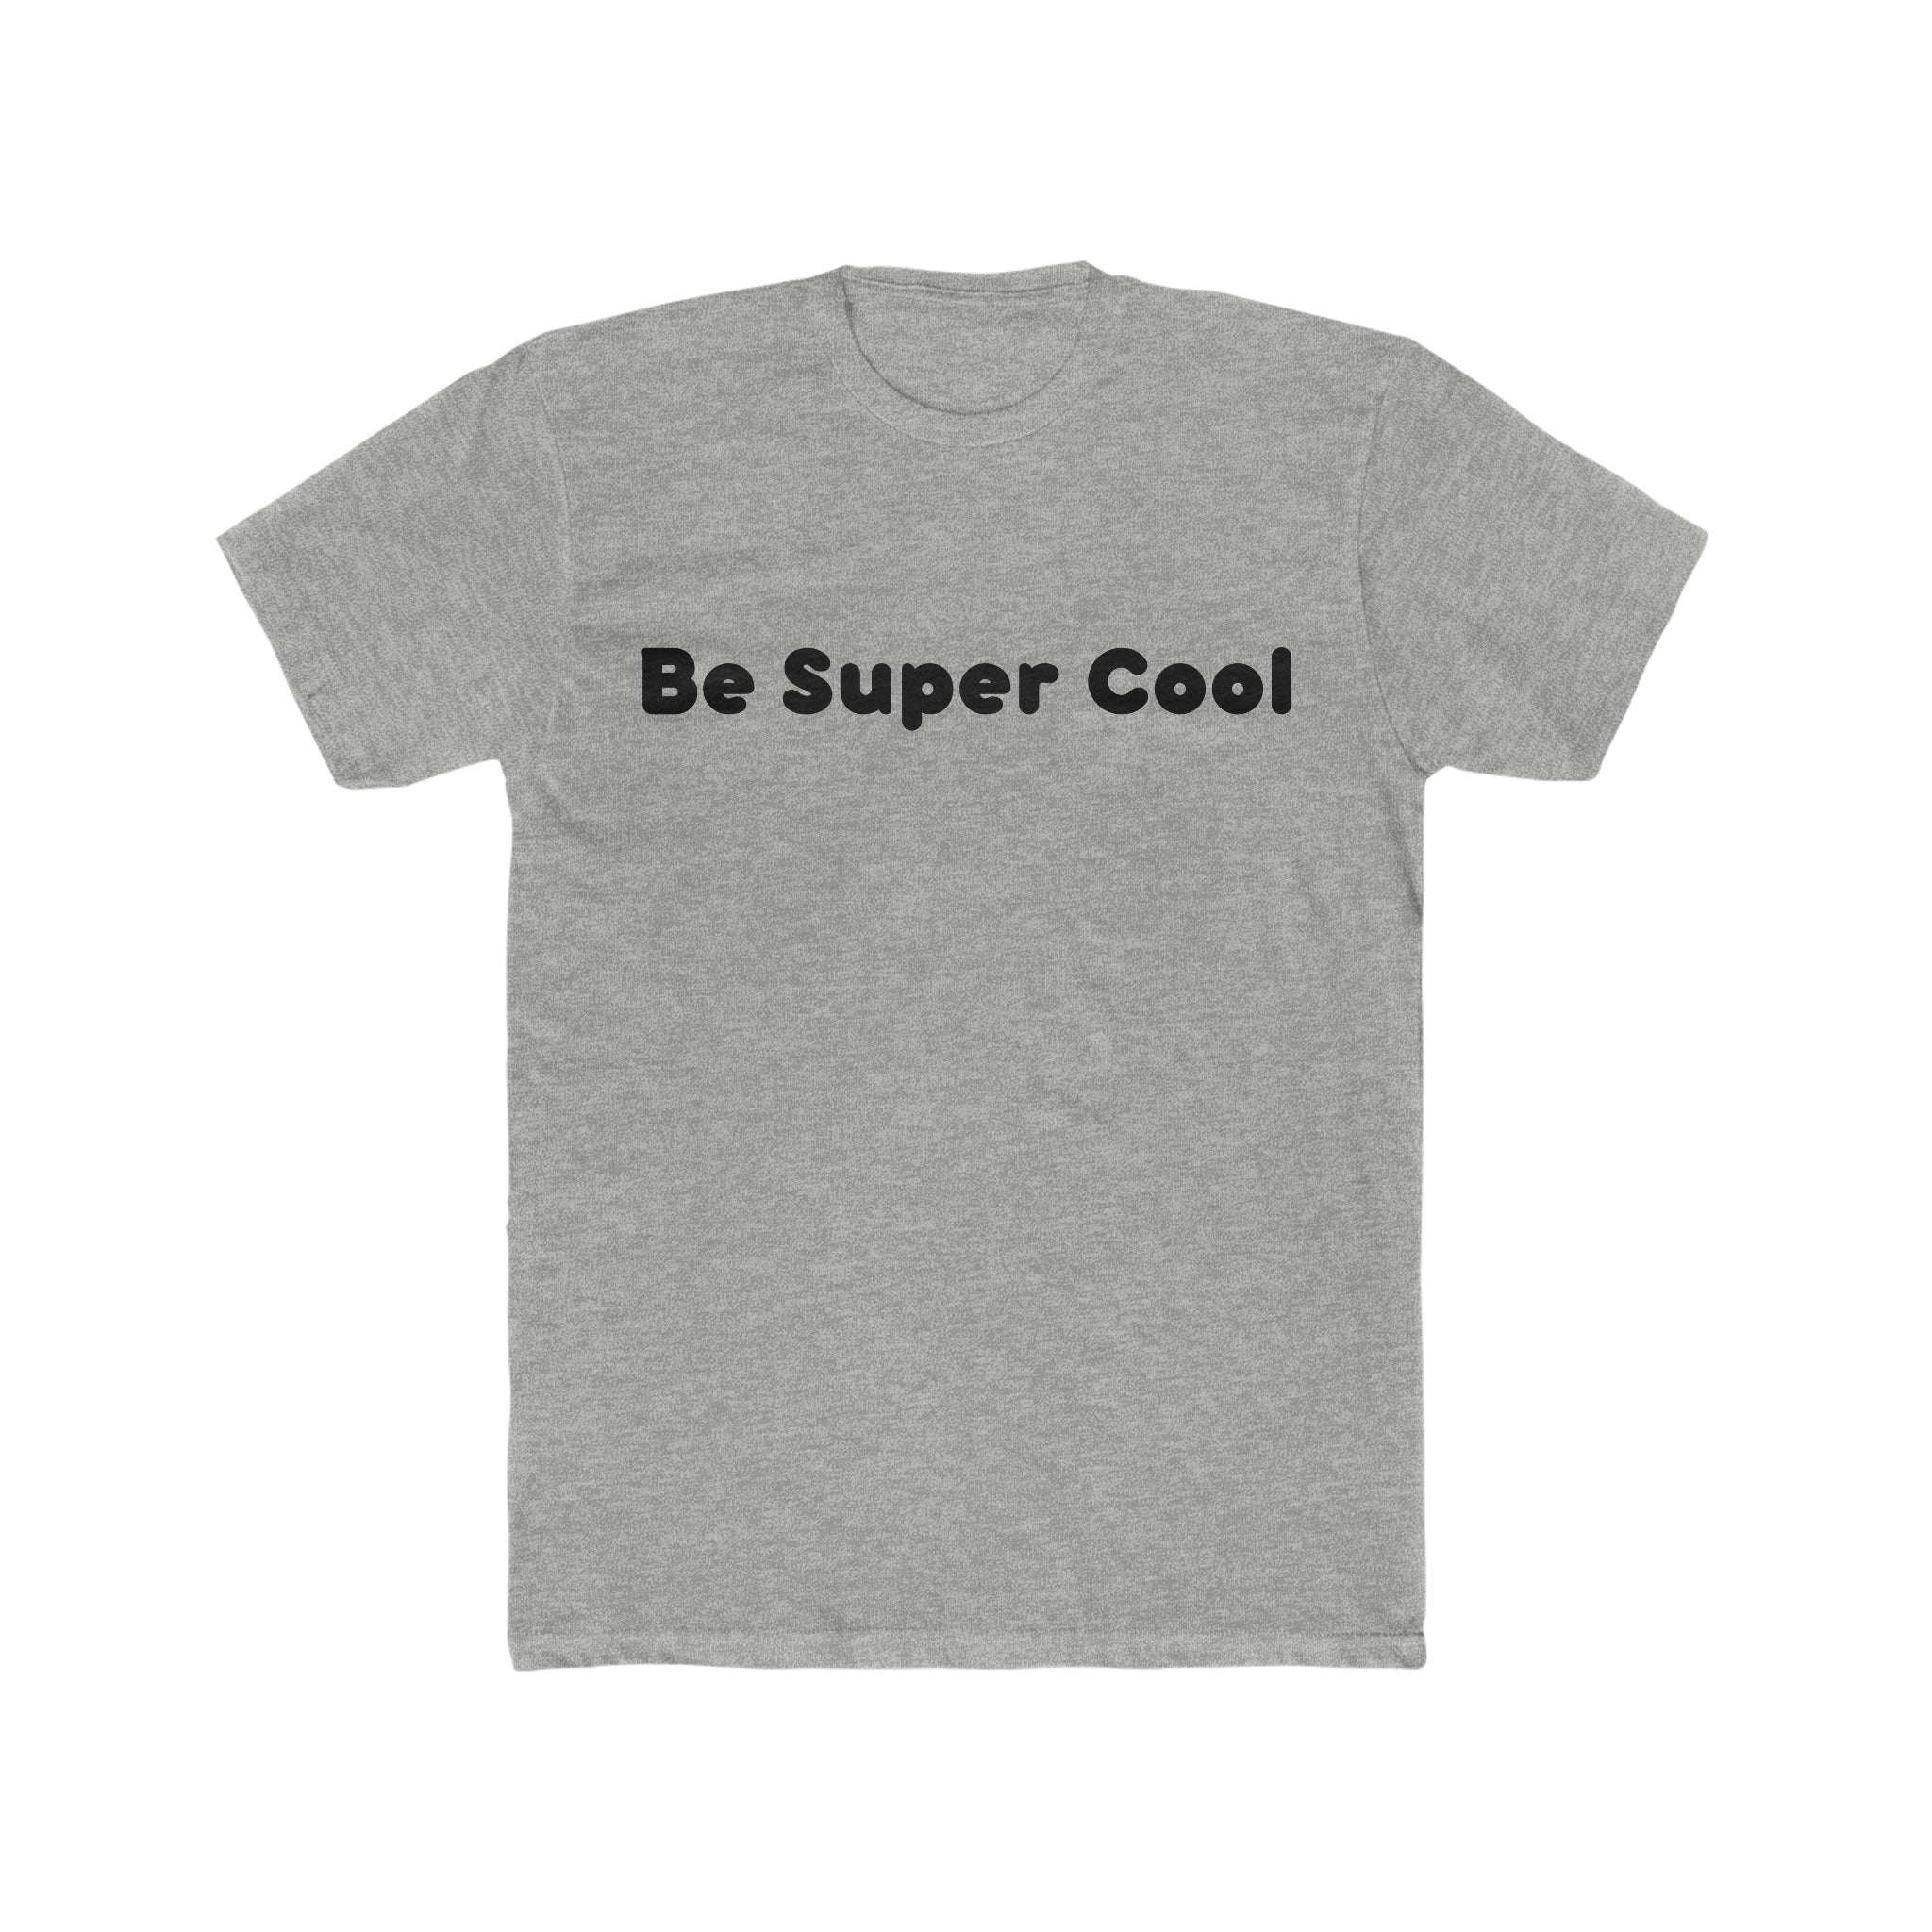 "Be Super Cool" Tee